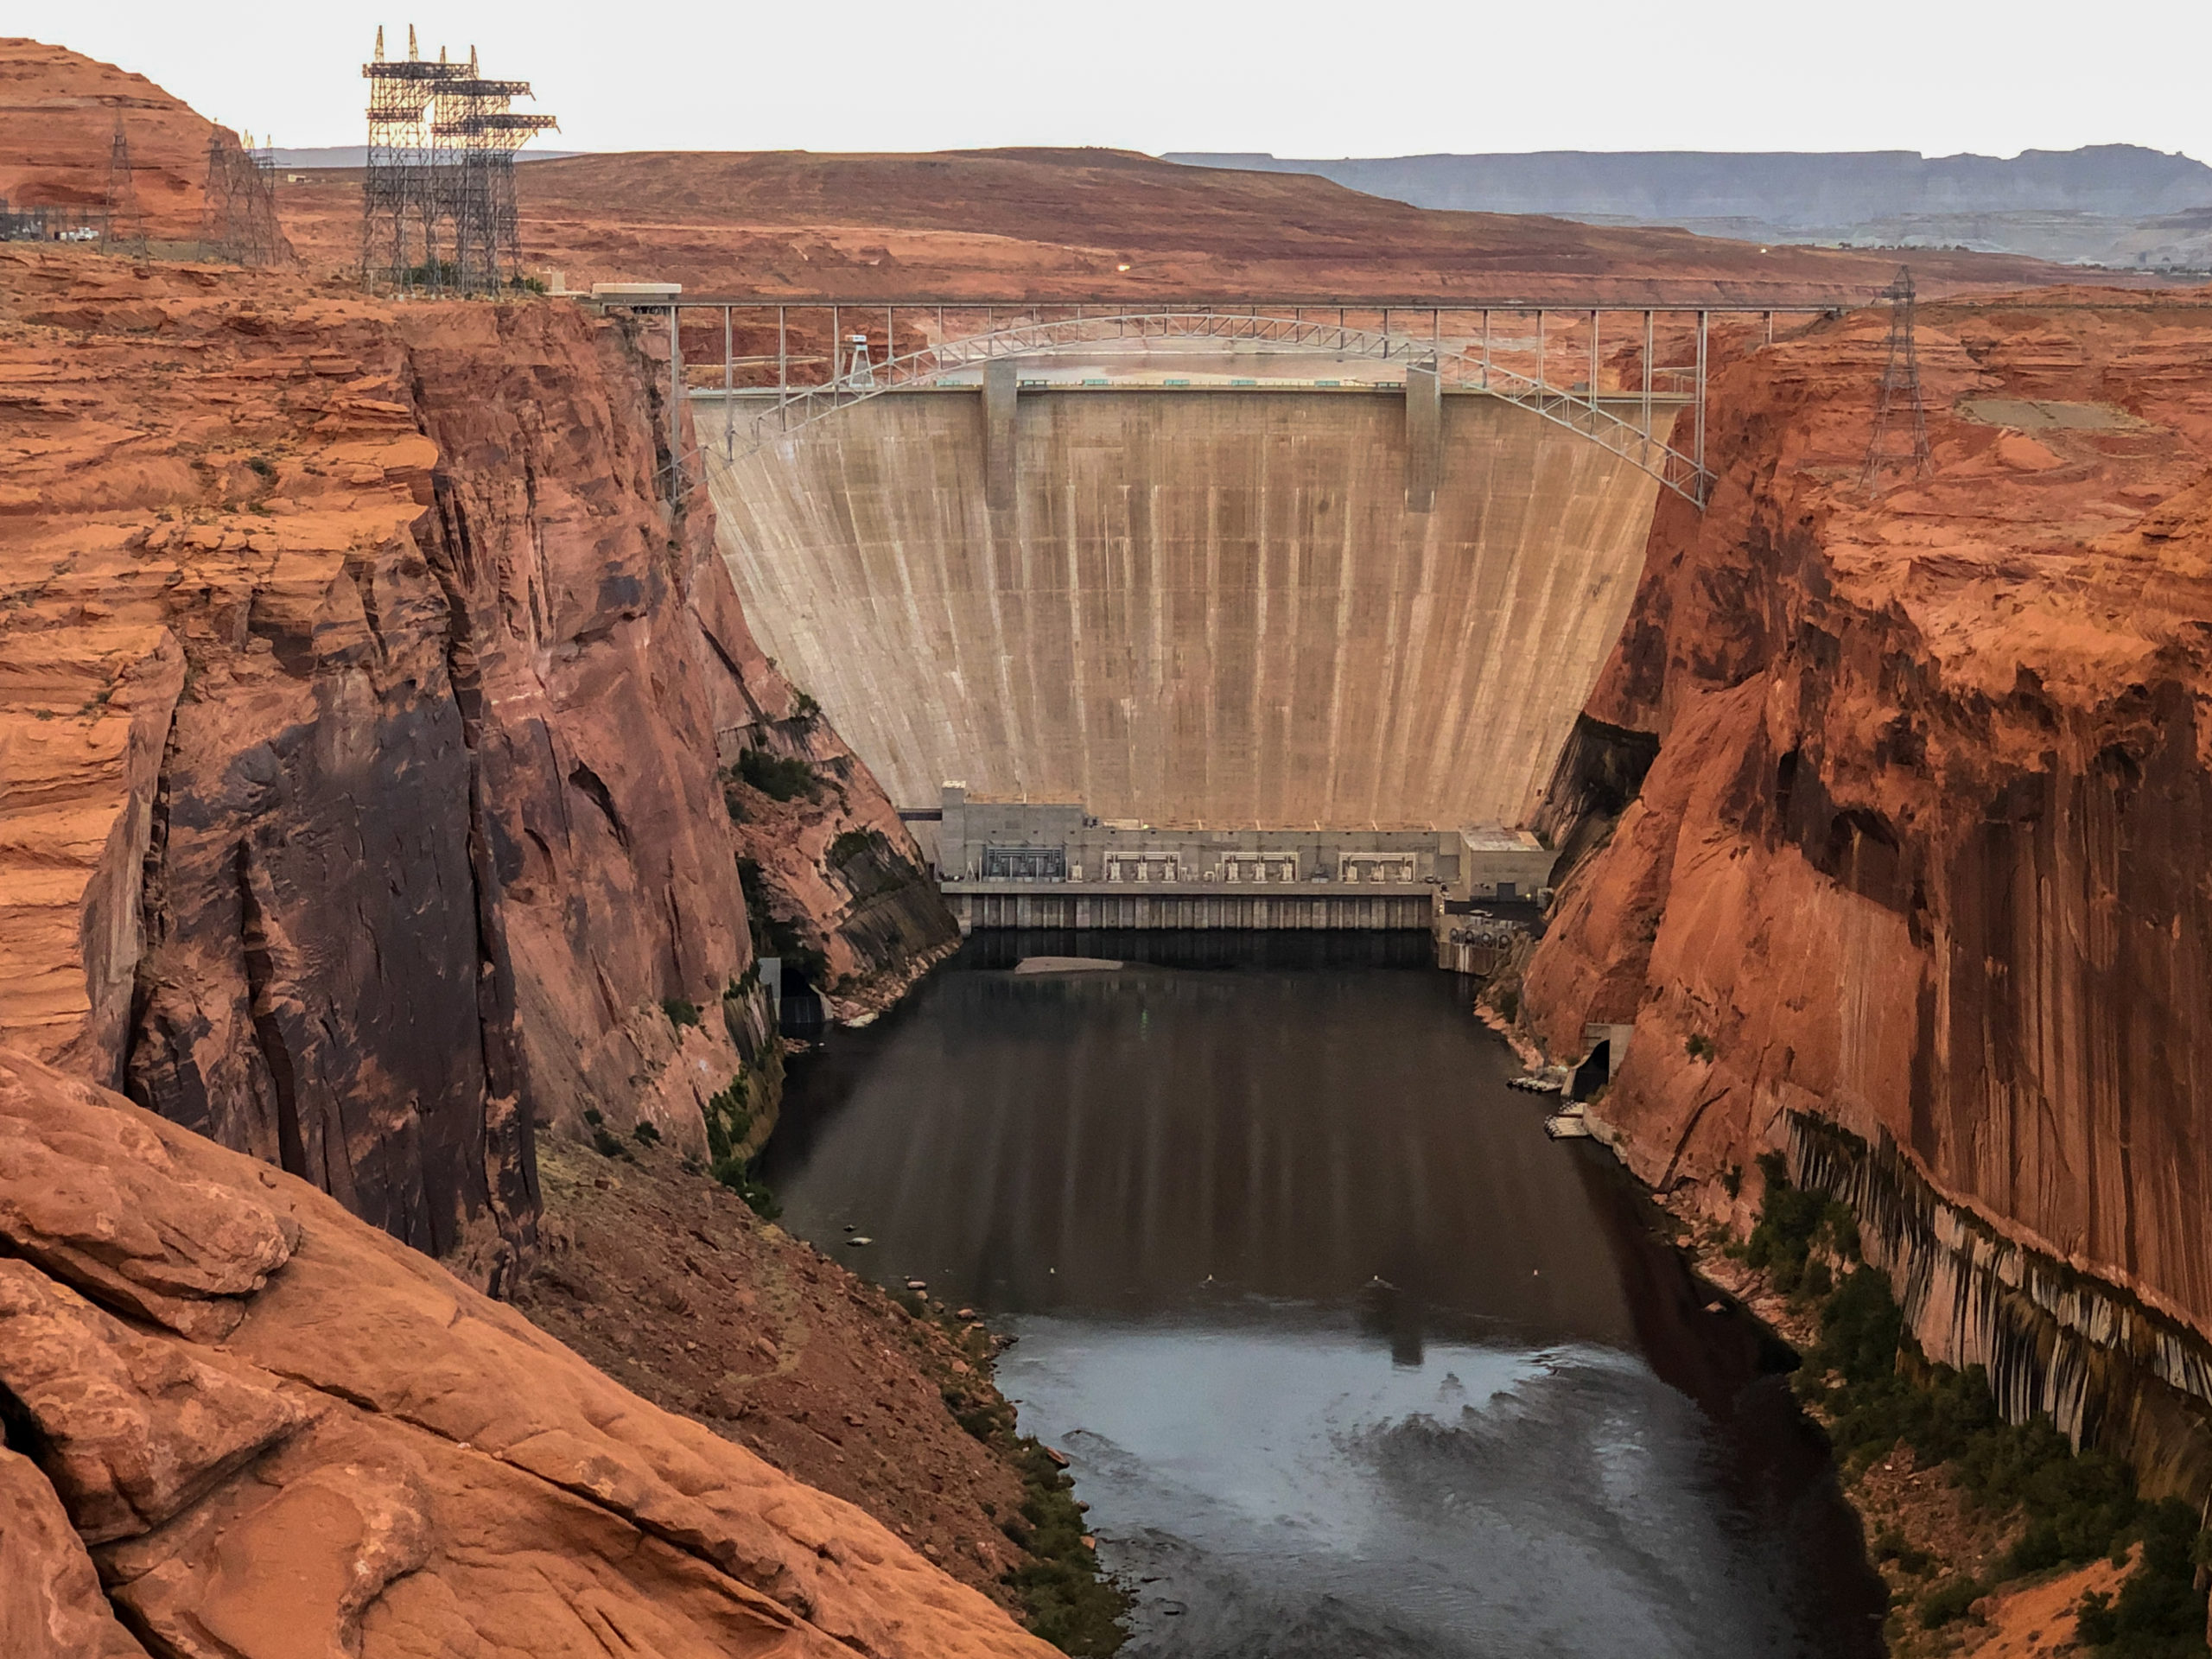 Glen Canyon Dam in Page, Arizona, was completed in 1963 and created Lake Powell along the Colorado River. The dam is 710 feet high and is the second tallest concrete-arch dam in the U.S. second to Hoover Dam near Las Vegas. Photo credit: Denver Water.